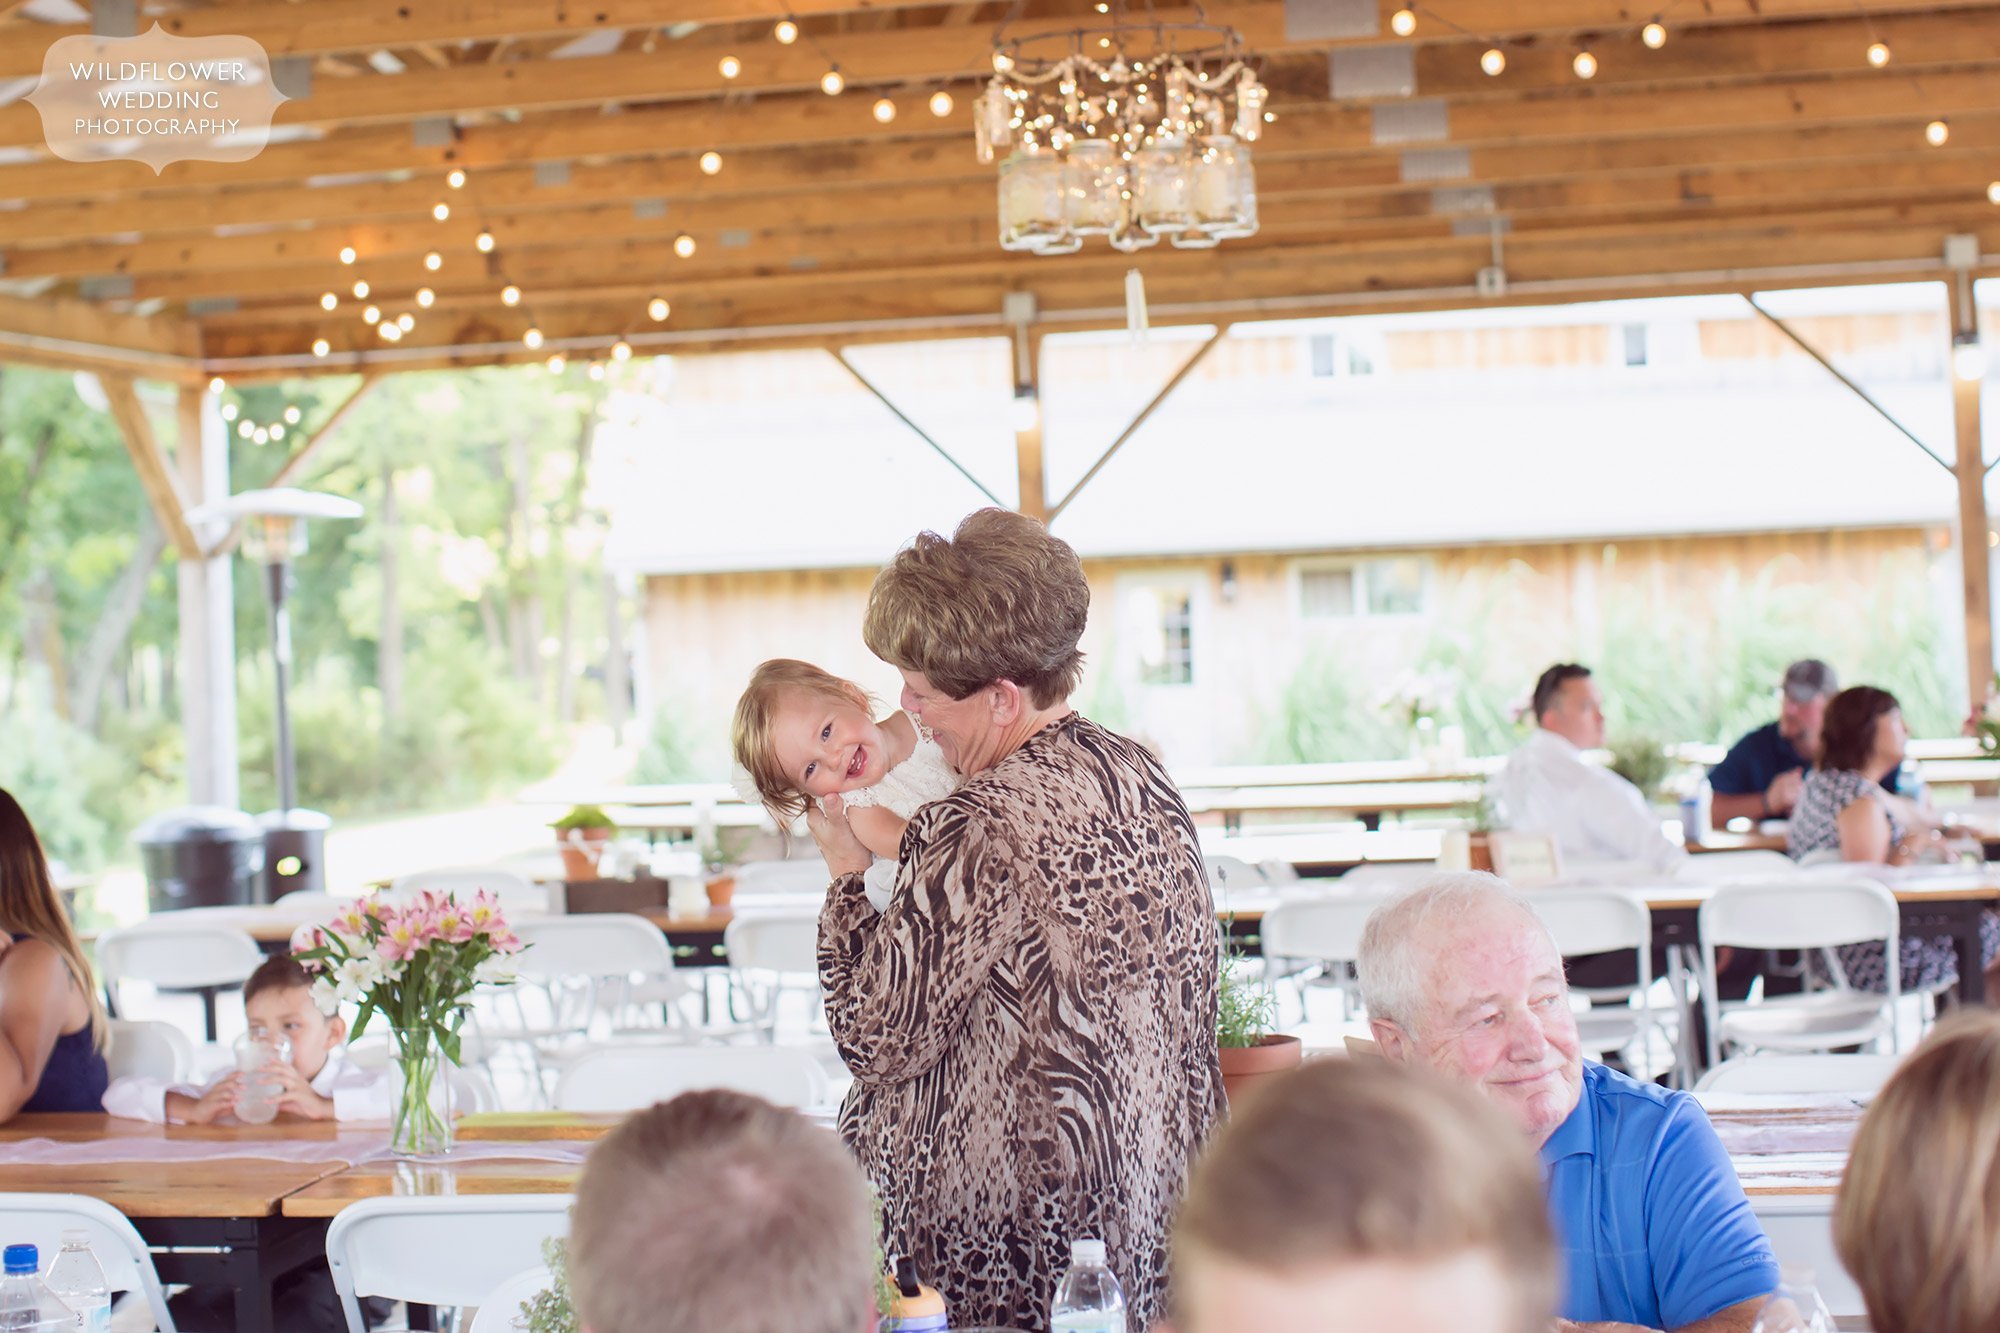 Great documentary wedding photo of the grandmother smiling with her granddaughter after dinner in the covered pavilion at this country wedding venue.